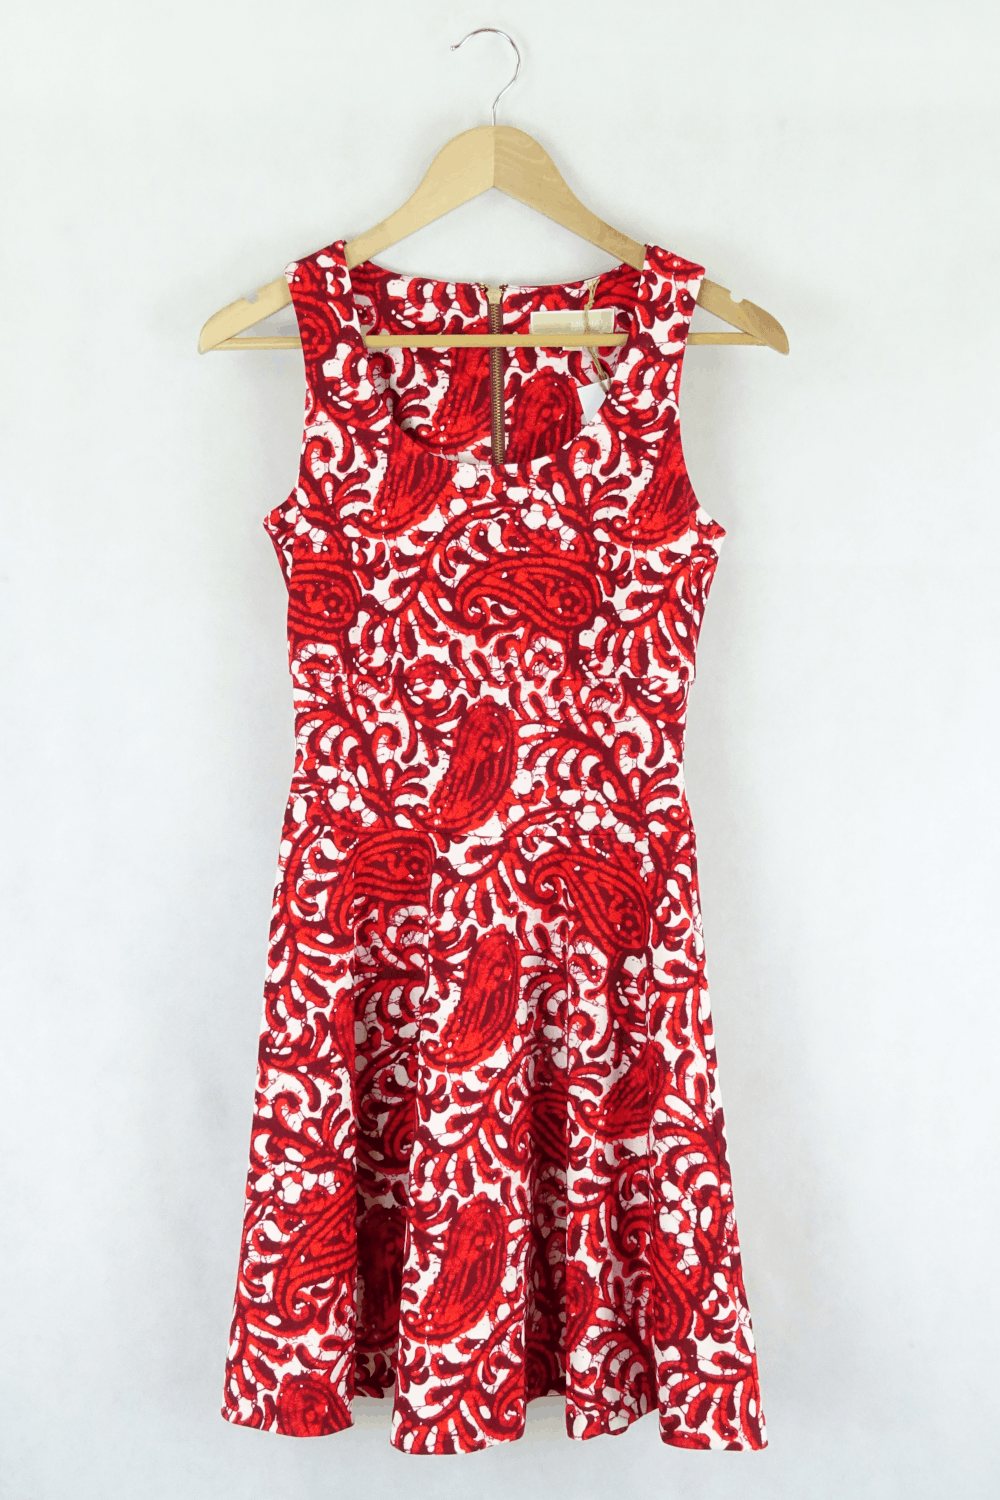 Michael Kors Red and White Dress XS